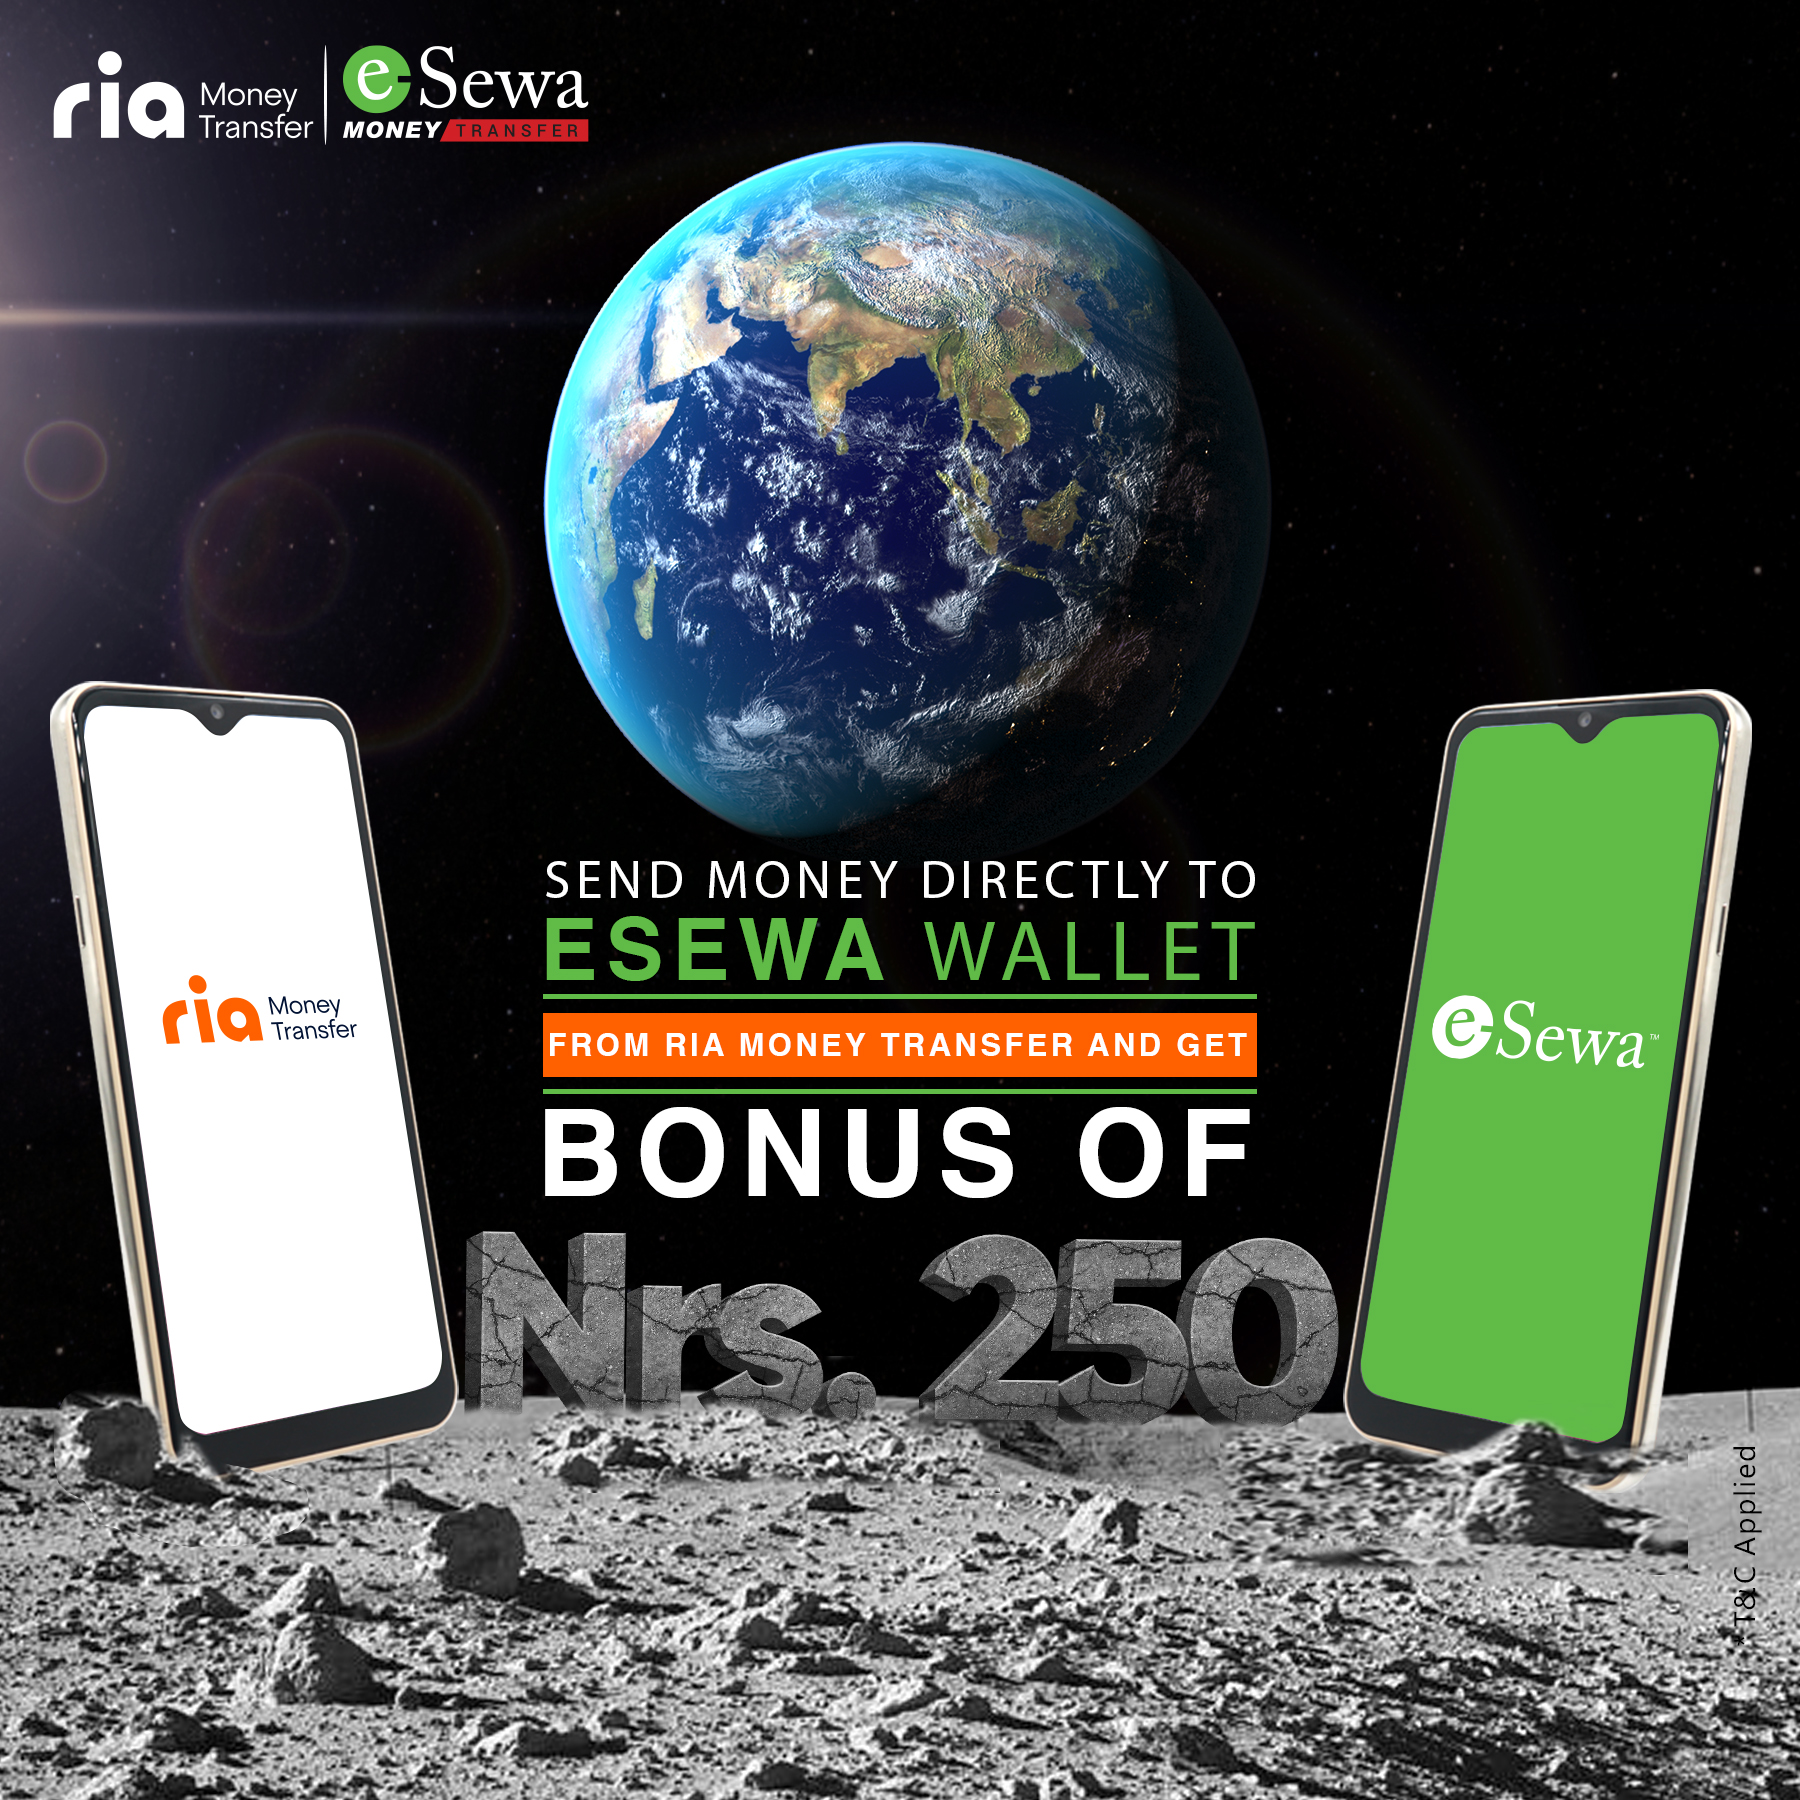 Rs. 250 bonus on offer while sending remittance directly from Ria Money Transfer to eSewa Wallet.